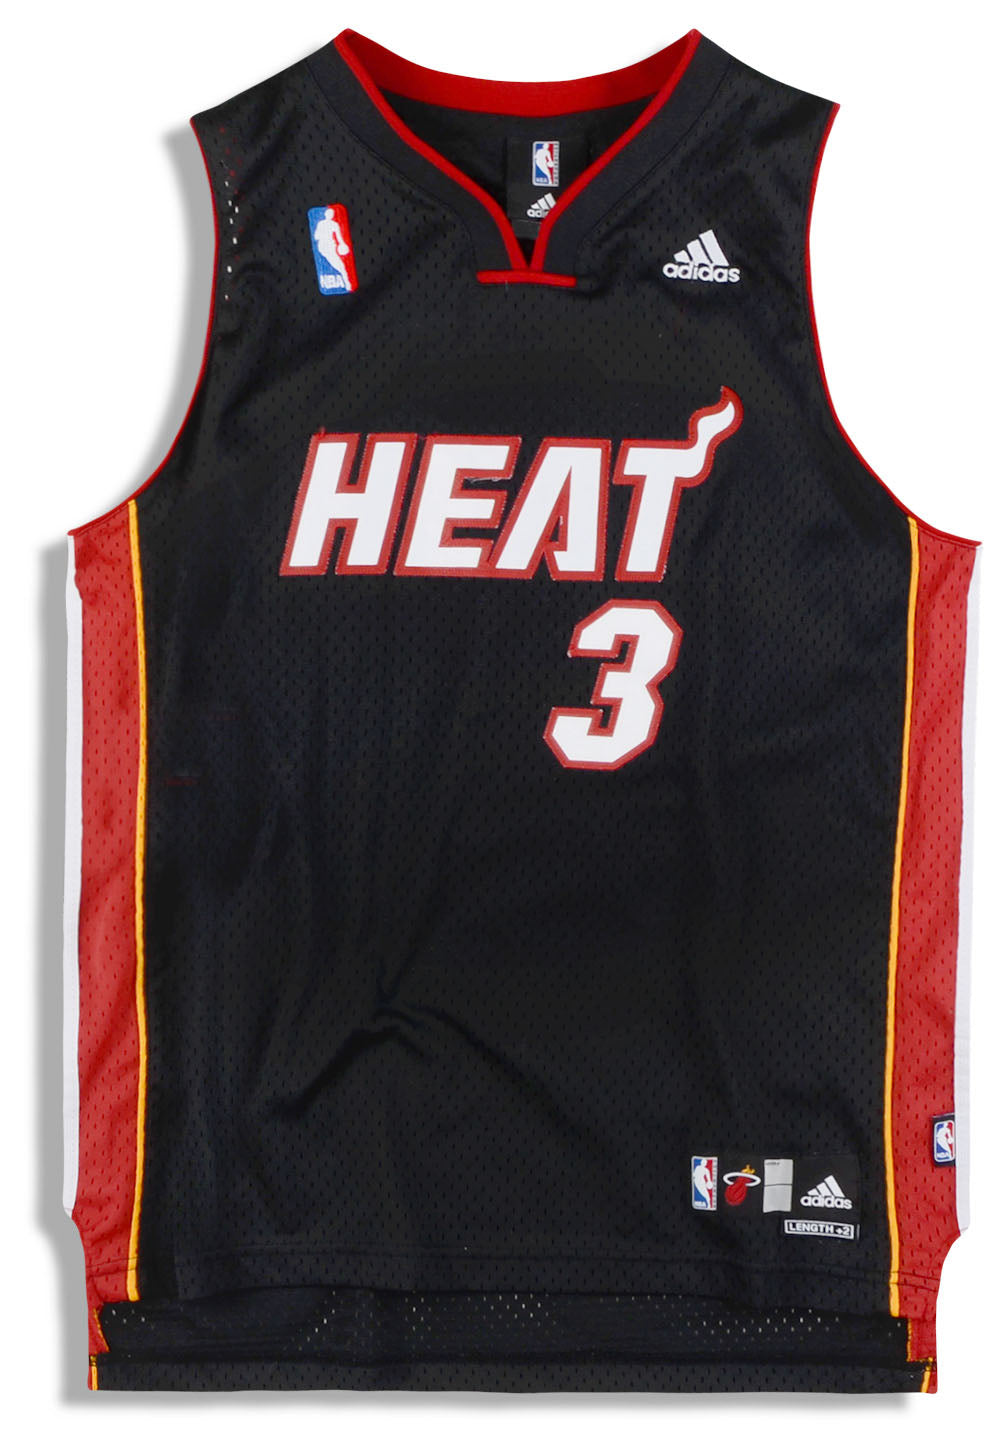 NBA Miami Heat Stiched Jersey Lebron James Dwayne Wade Black And Red